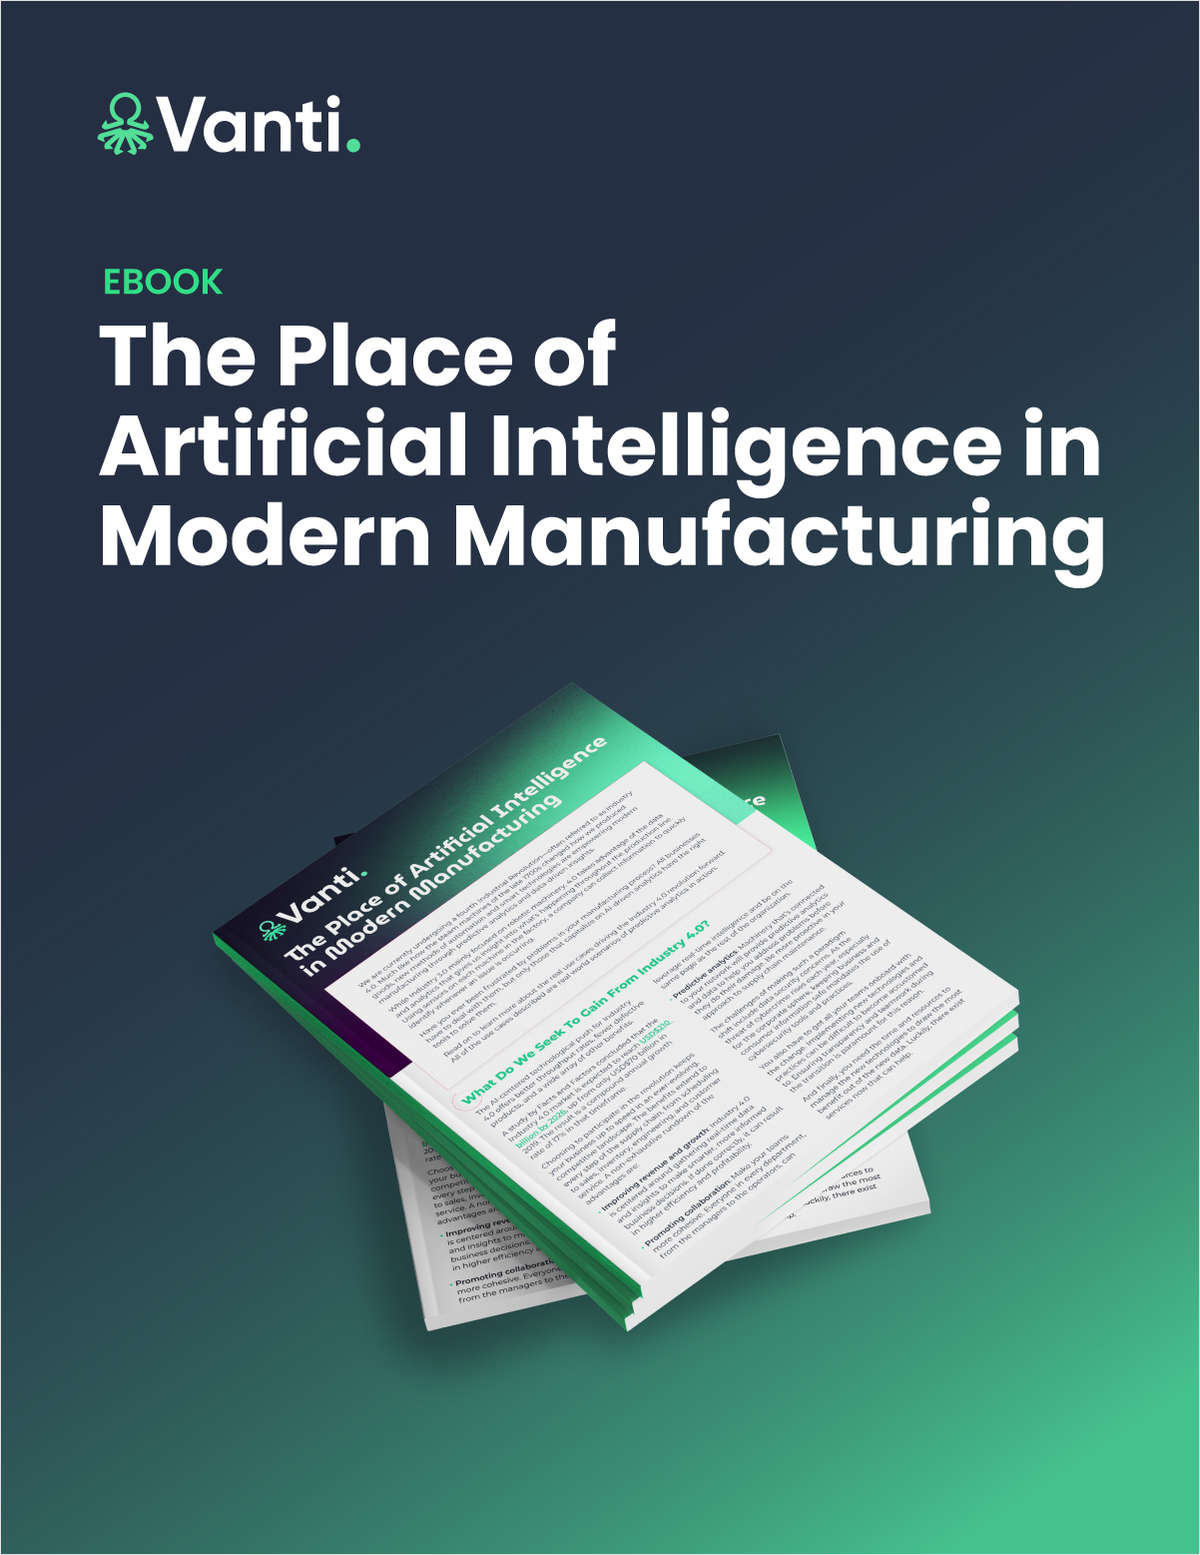 The Place of AI in Modern Manufacturing